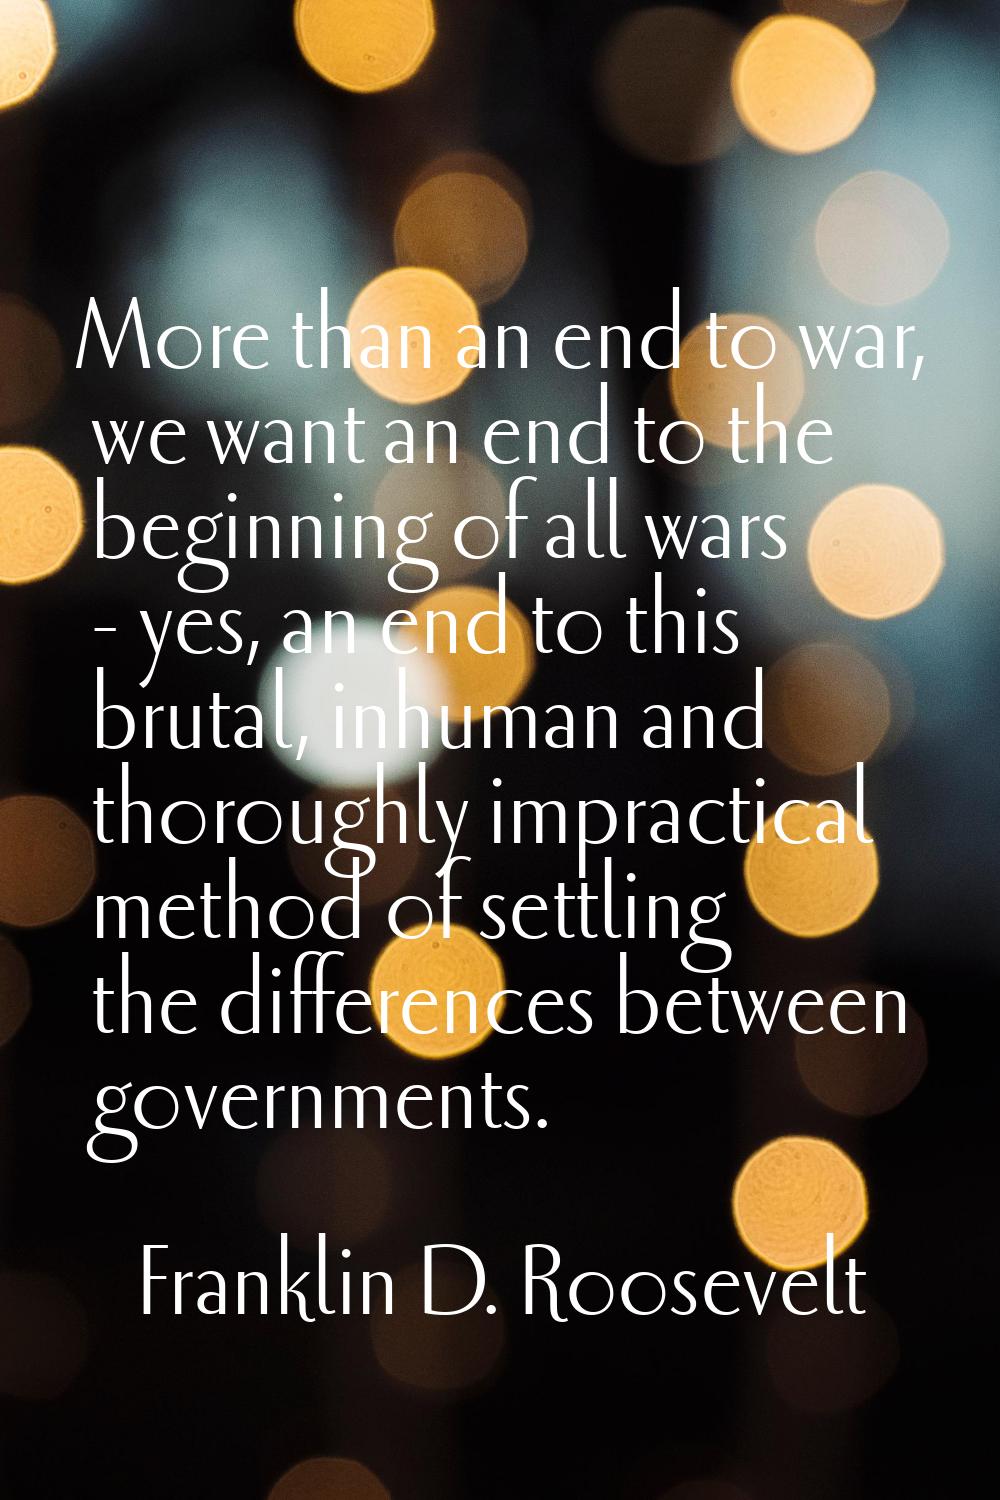 More than an end to war, we want an end to the beginning of all wars - yes, an end to this brutal, 